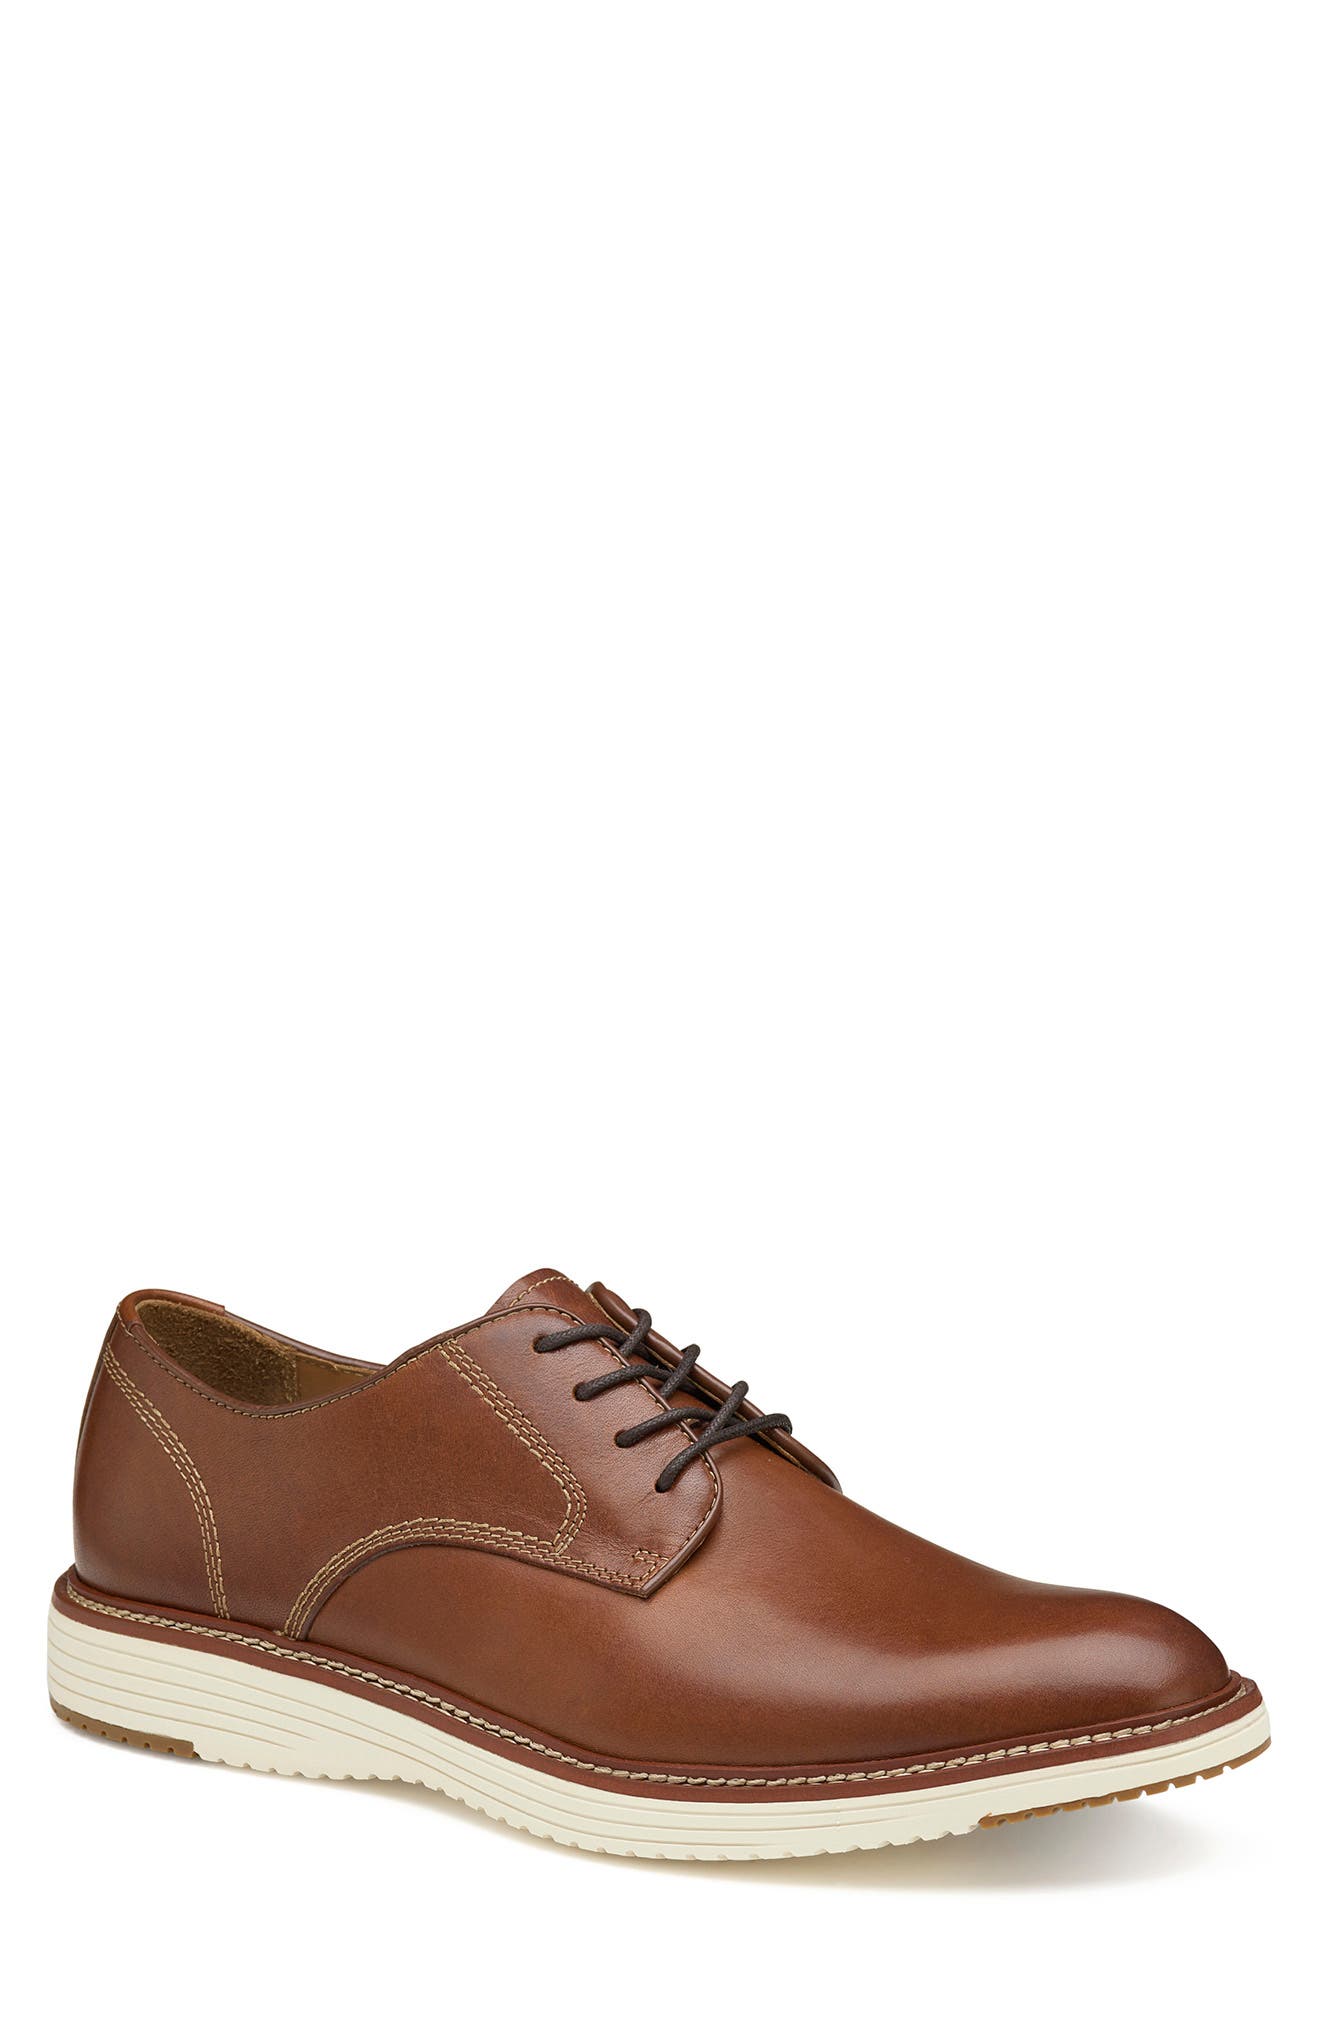 Hush Puppies Hancock Low Chocolate Brown Suede Shoes UK Sizes 7-12 